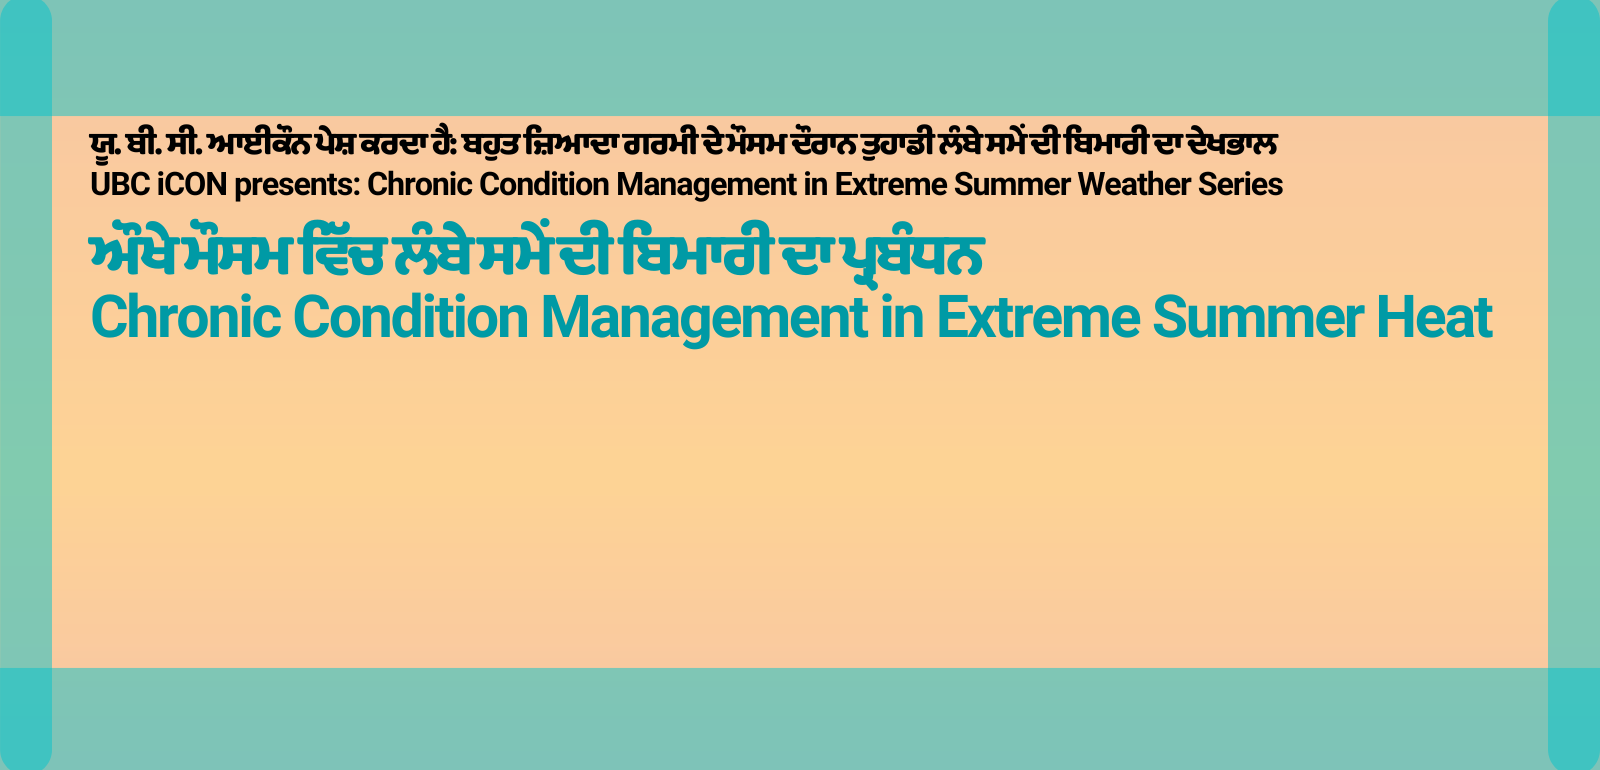 Chronic Condition Management in Extreme Summer Heat